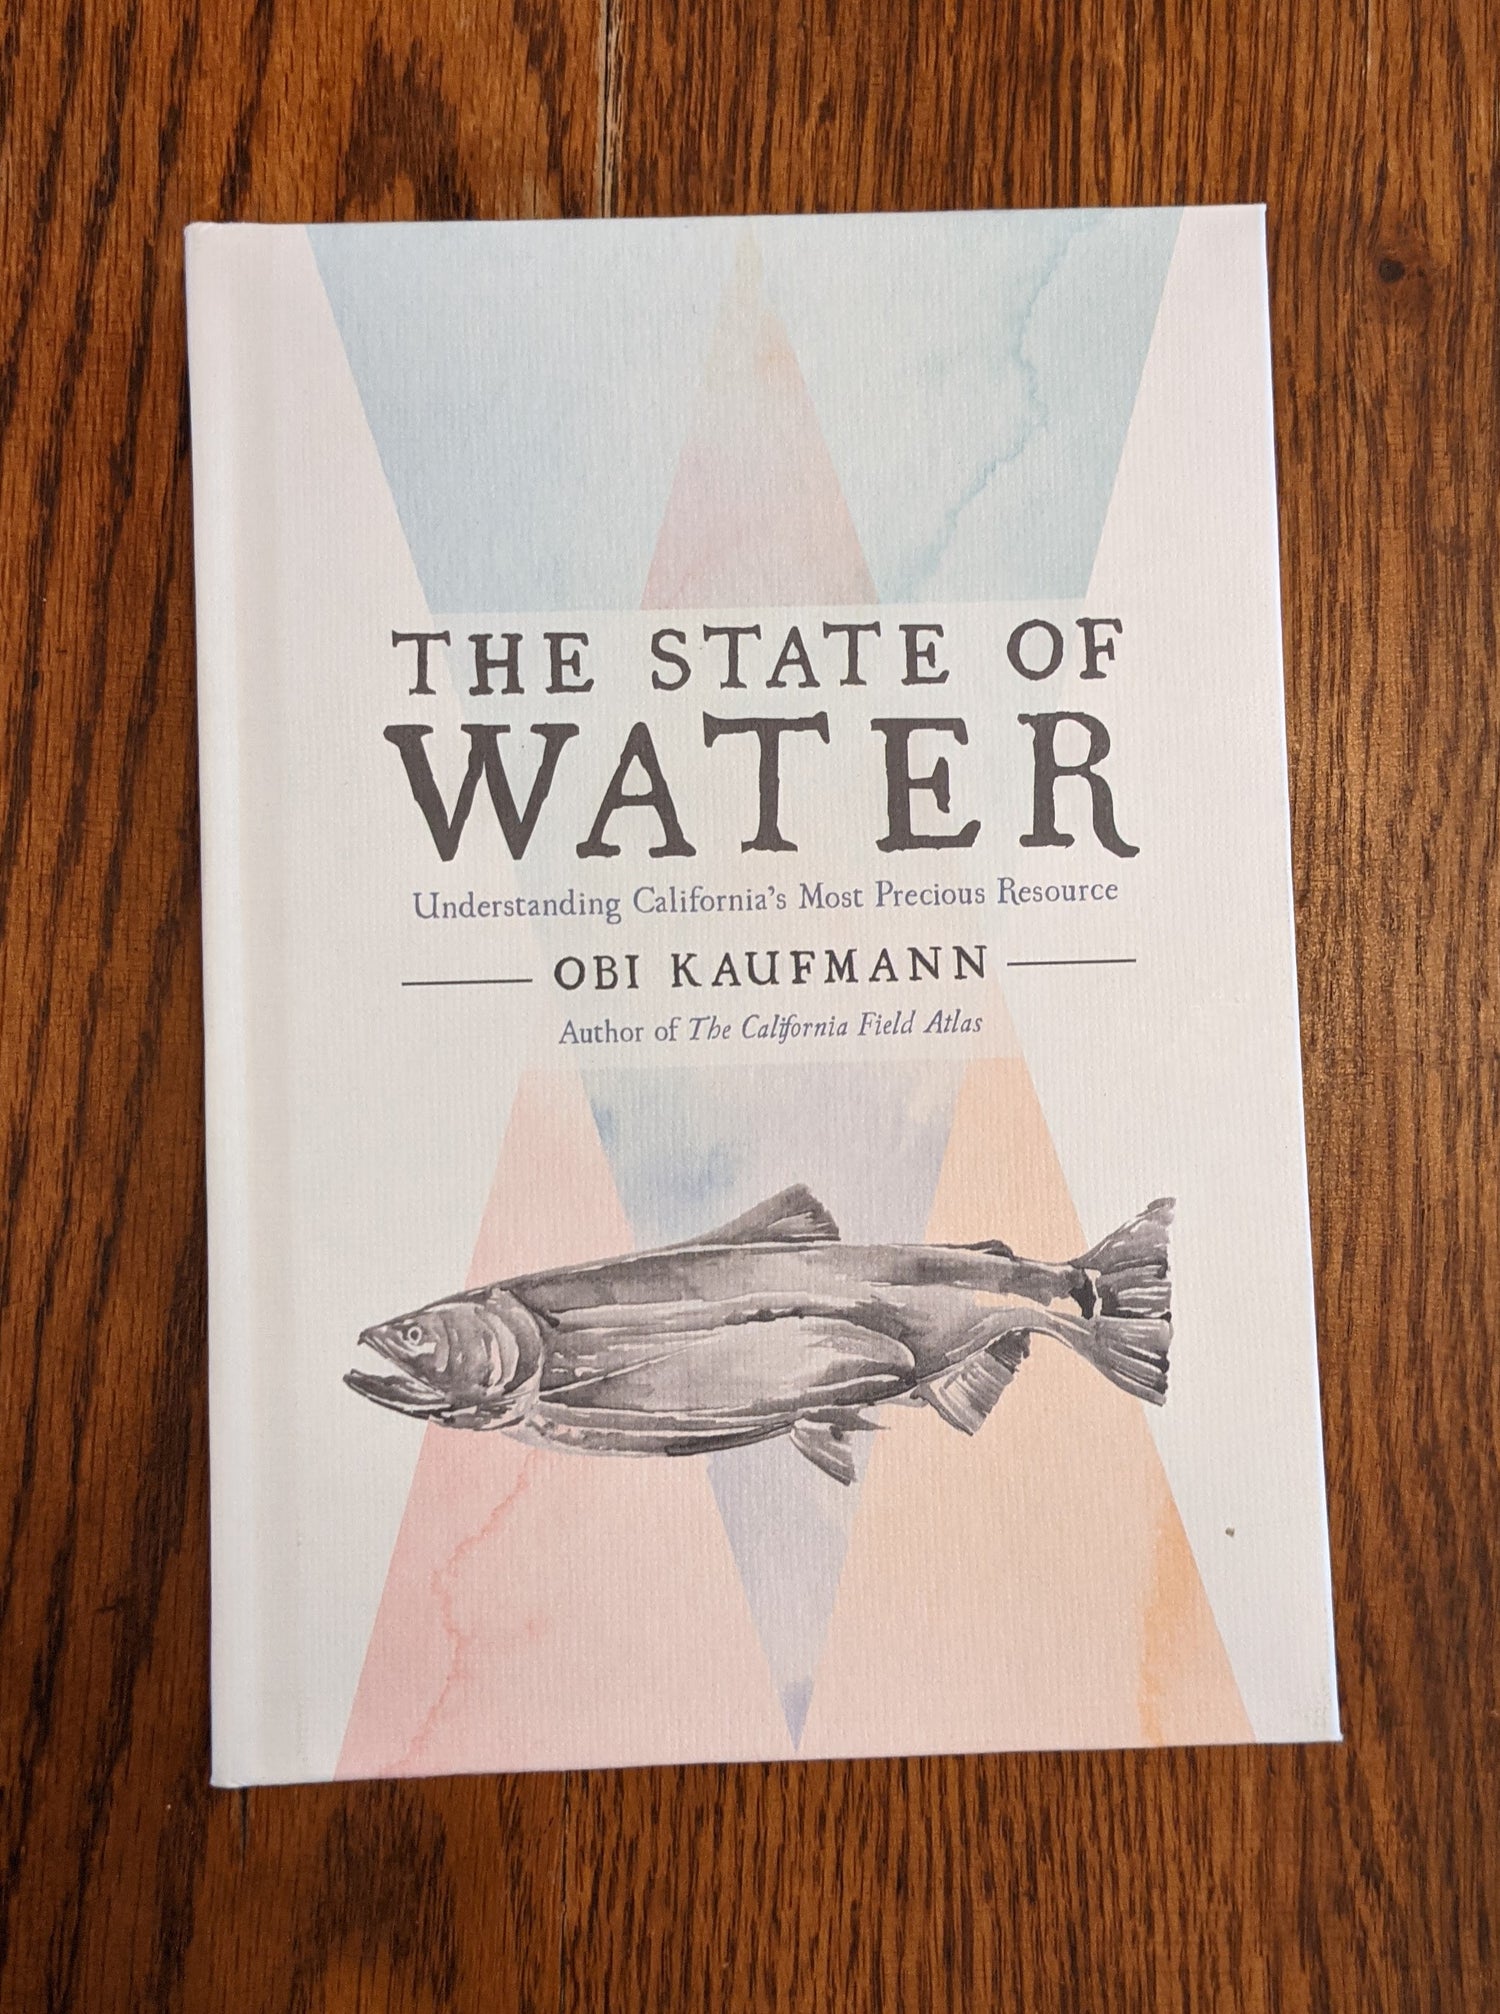 State of Water hardcover book by Obi Kaufmann